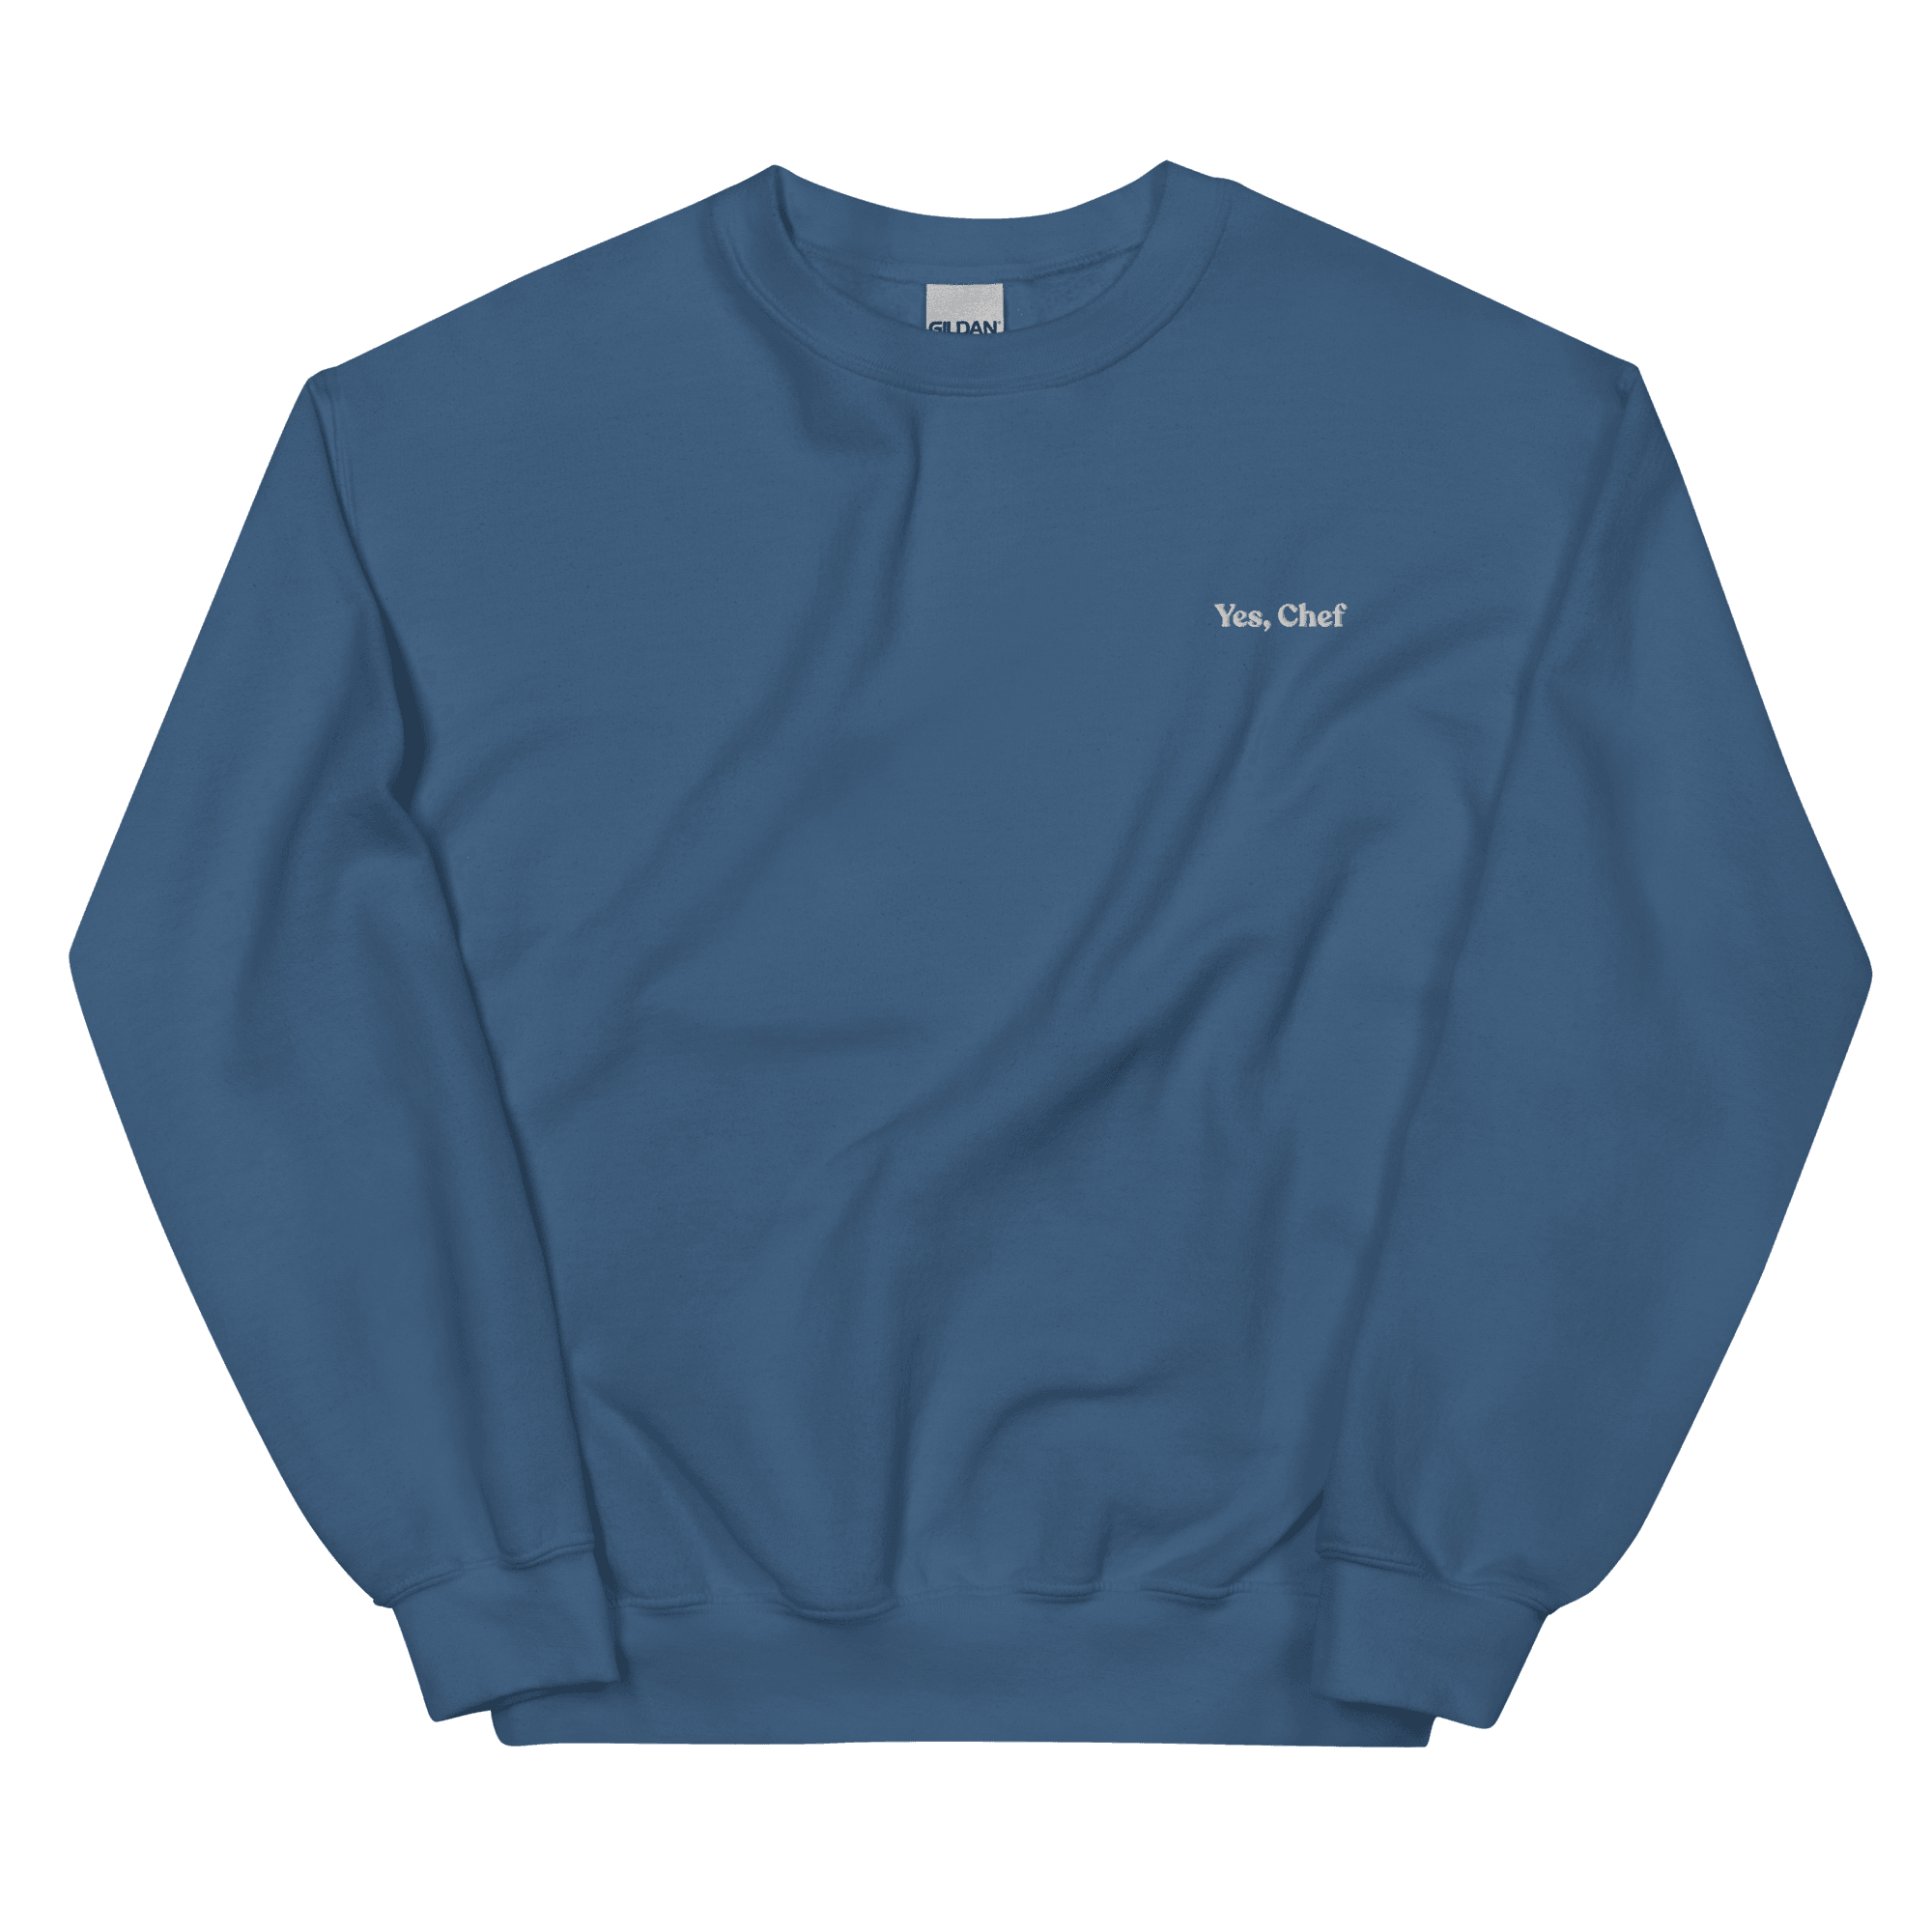 Yes, Chef Embroidered Sweatshirt - Polychrome Goods 🍊